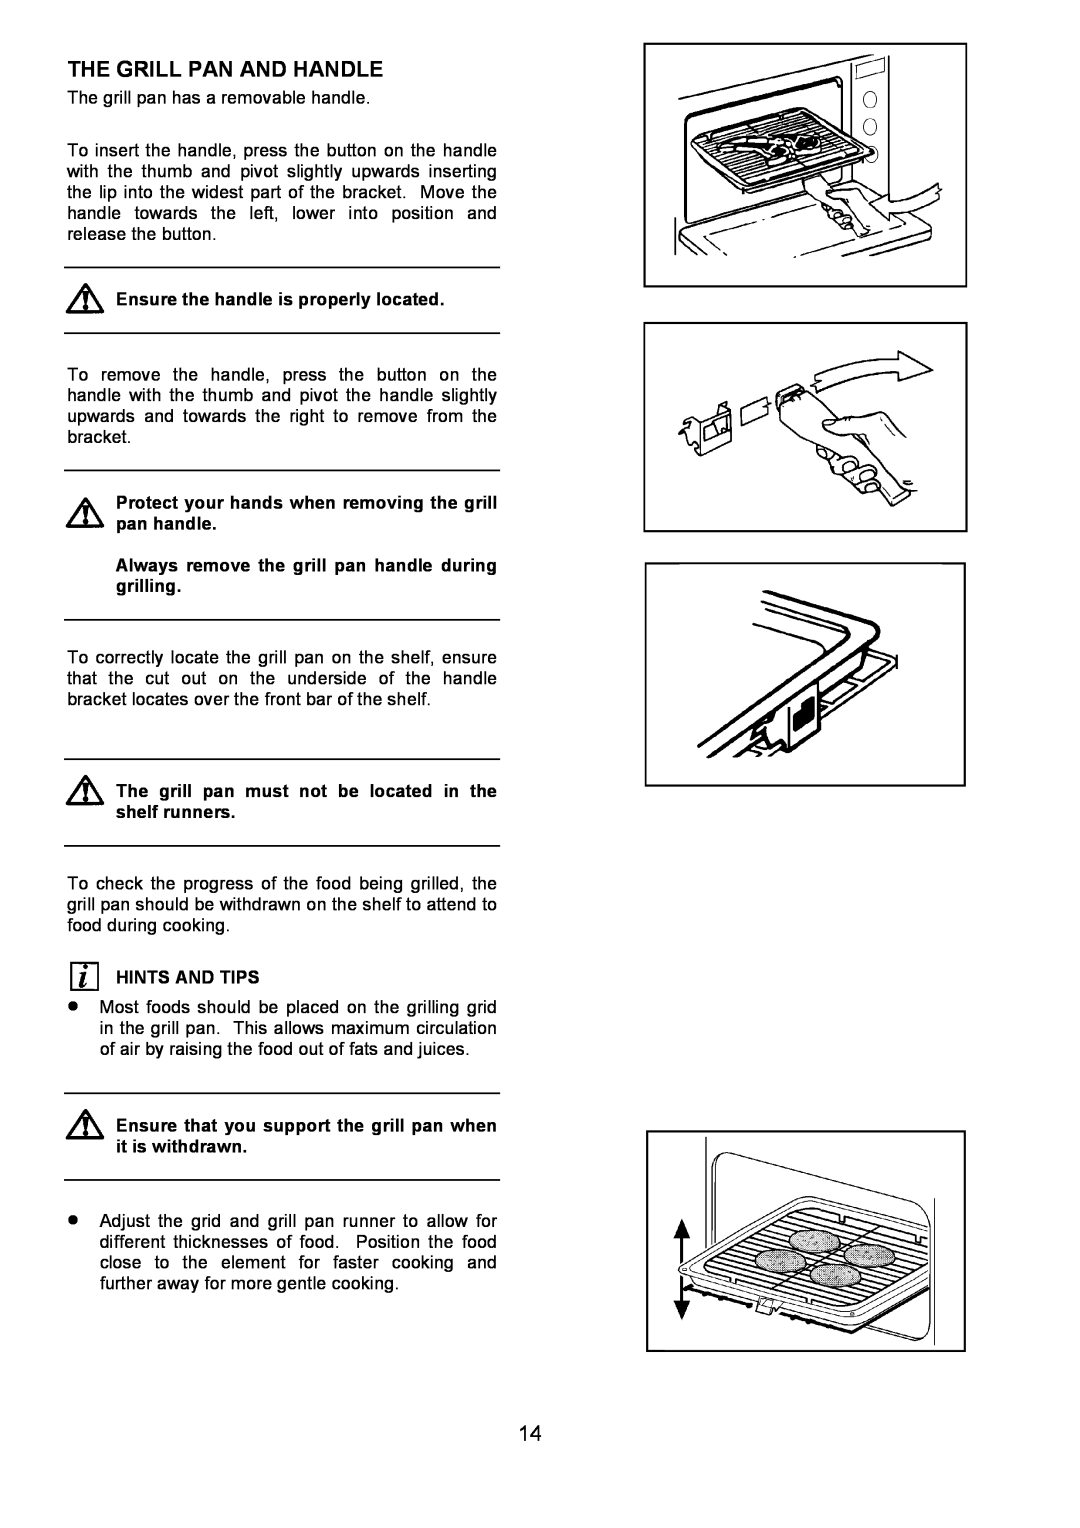 AEG 3210 BU installation instructions The Grill Pan And Handle, Ensure the handle is properly located, Hints And Tips 